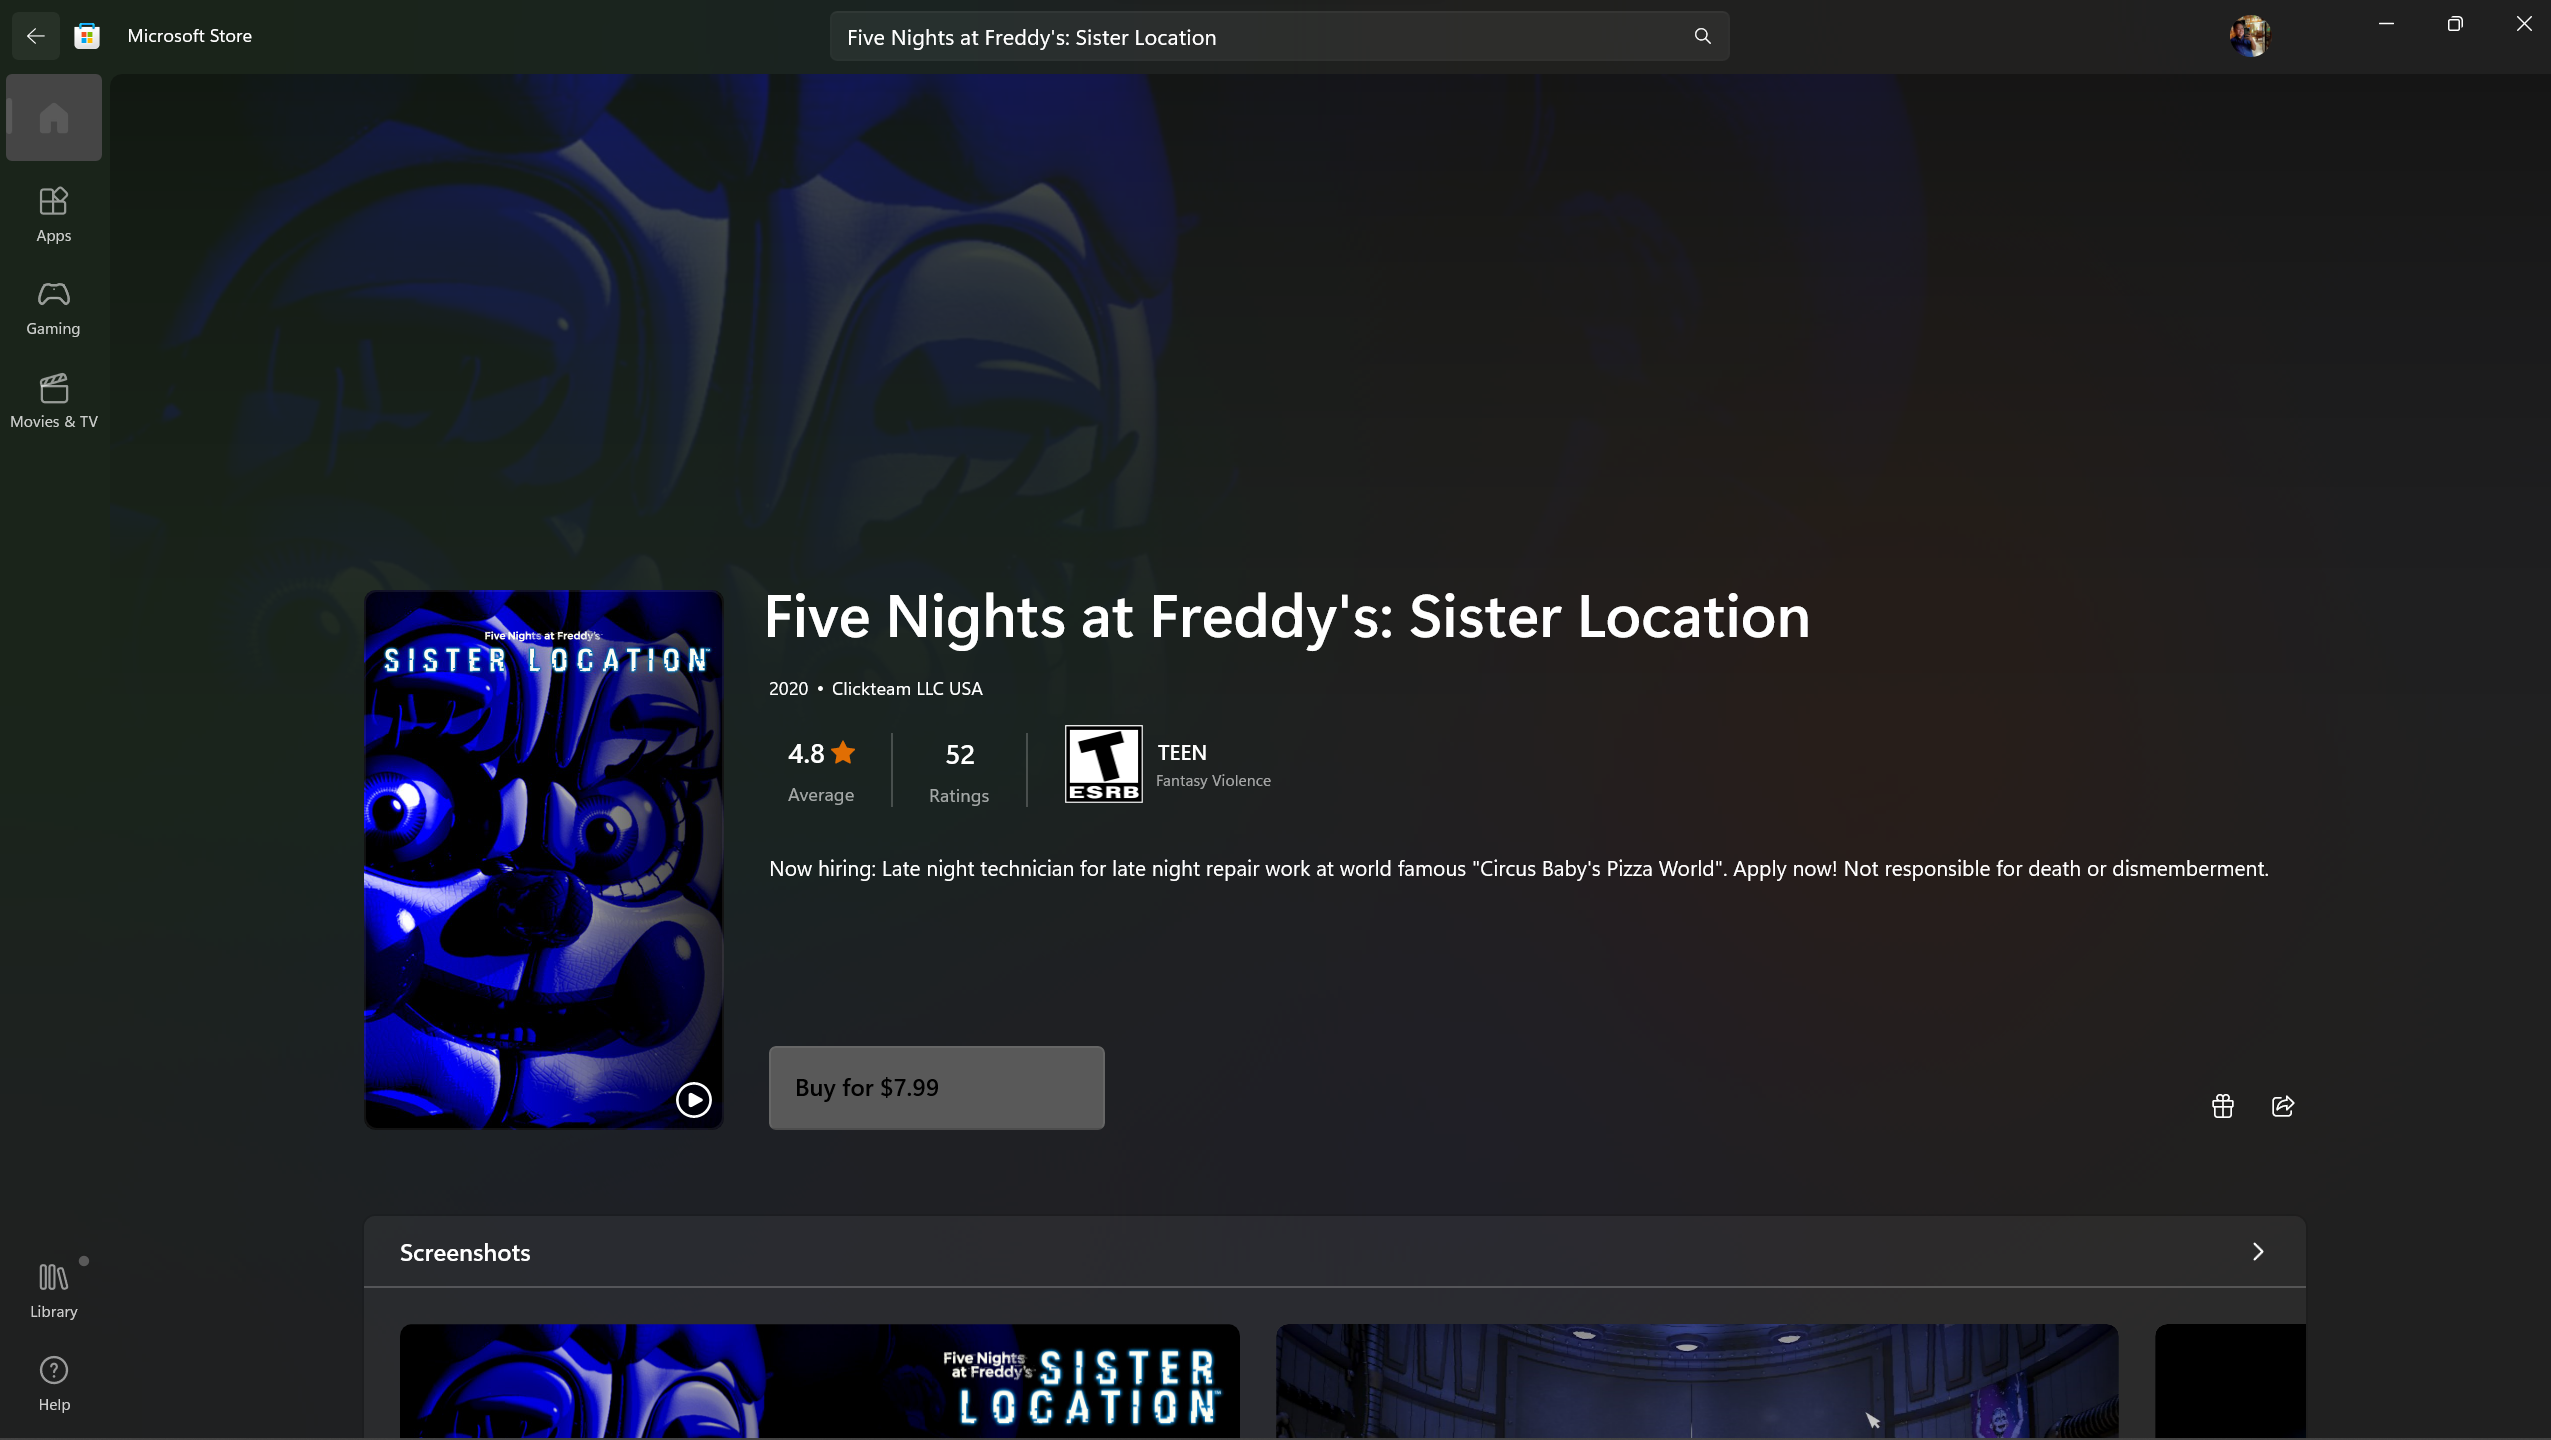 FNaF Sister Location not installing to Xbox for PC? - Microsoft Community